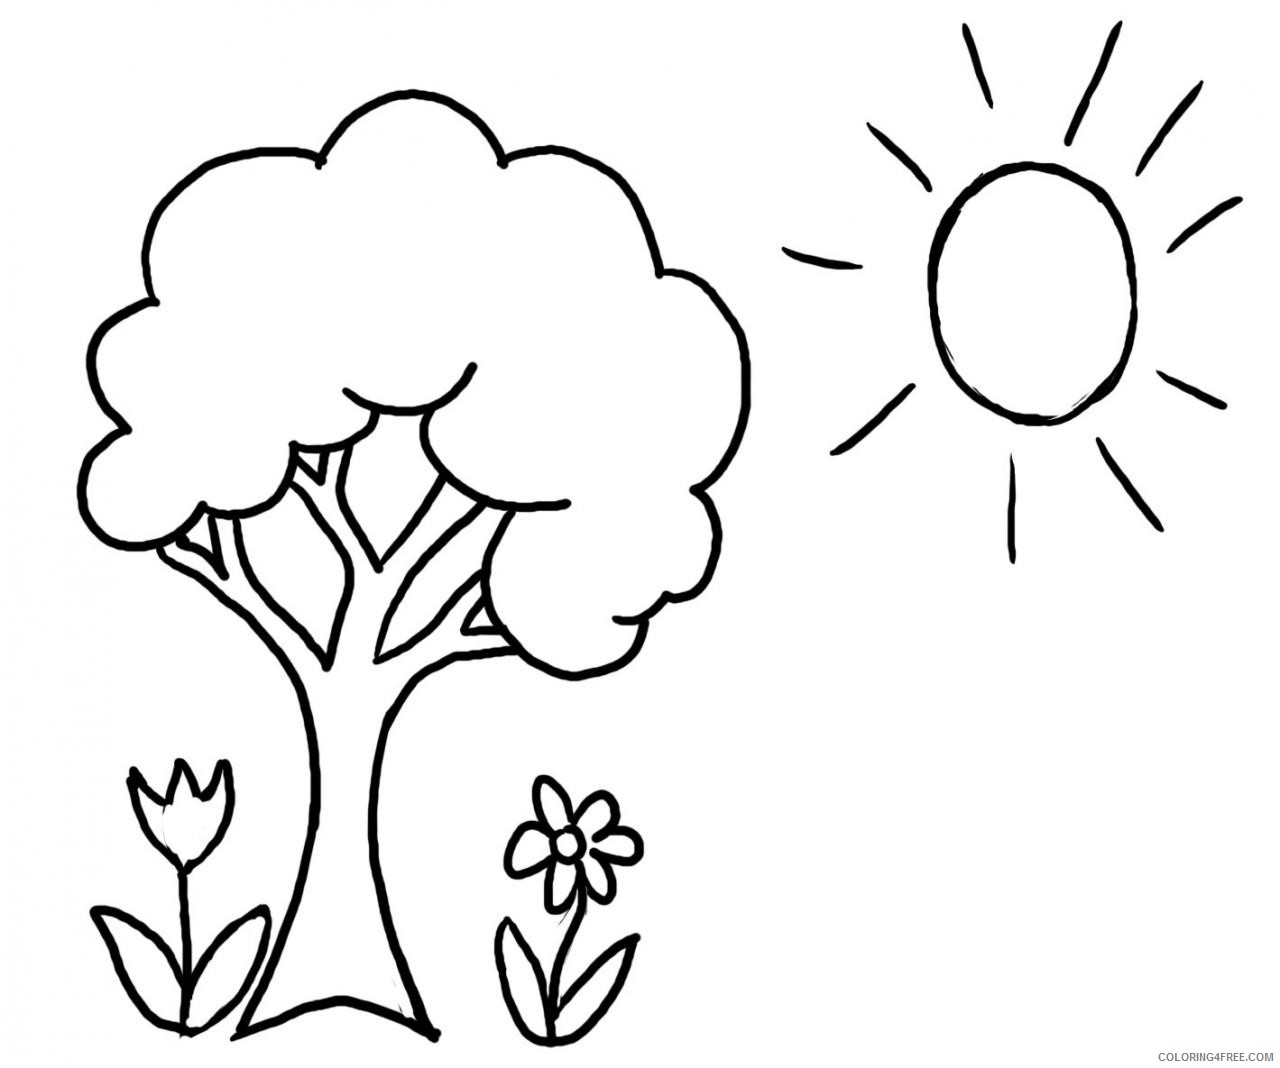 tree coloring pages sun and flowers Coloring4free